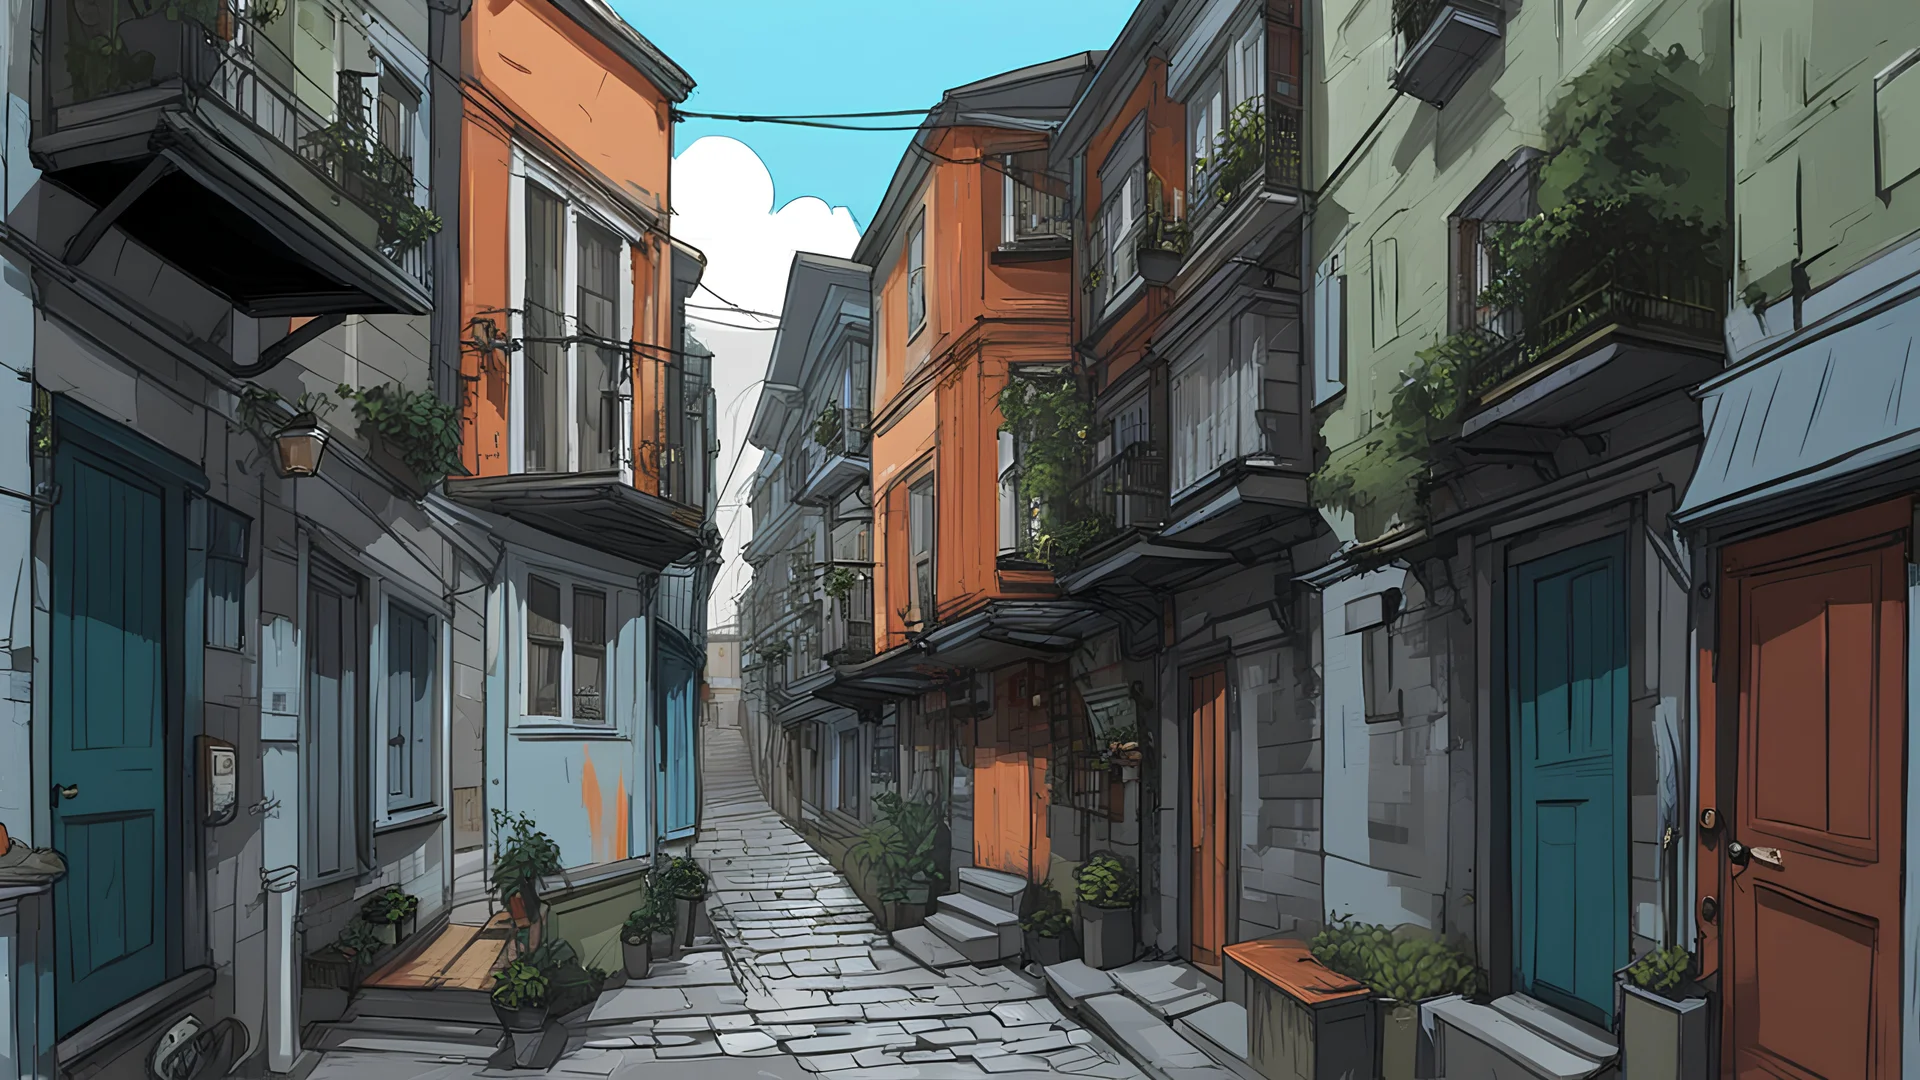 Turnkey, Istanbul alley, Flat, 1800 AD, 3 View, Vector, Flat Color, Digital Painting, Vector, Real, Illustration, Animation, Story board